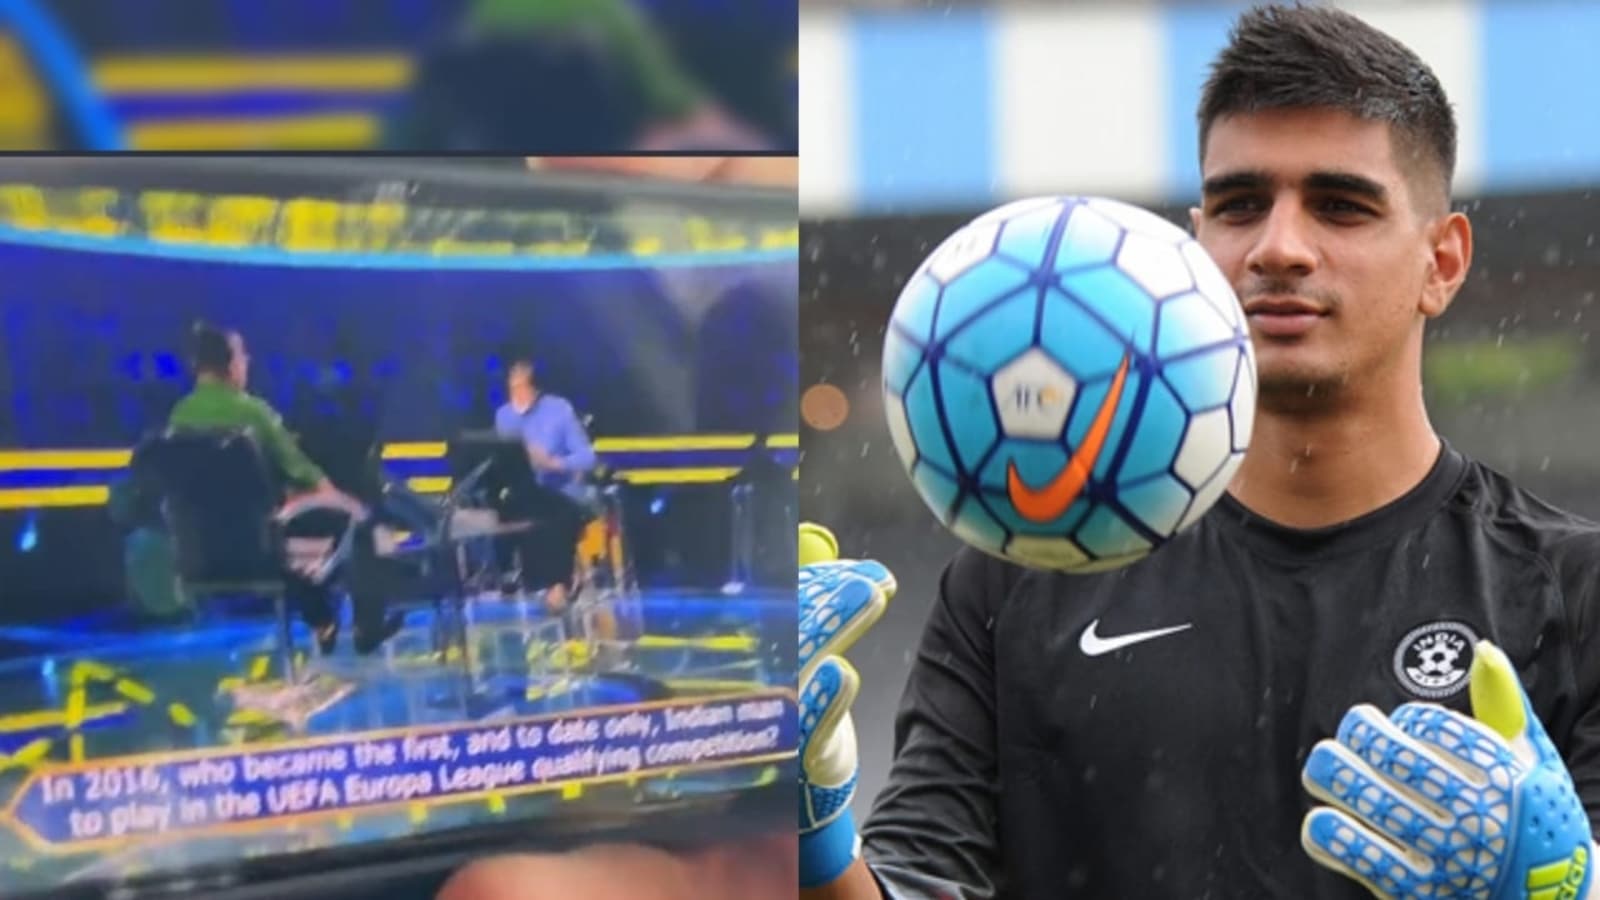 ‘Phone a friend pe mujhe call karo’: India goalkeeper posts epic video reacting to question by Amitabh Bachchan in KBC